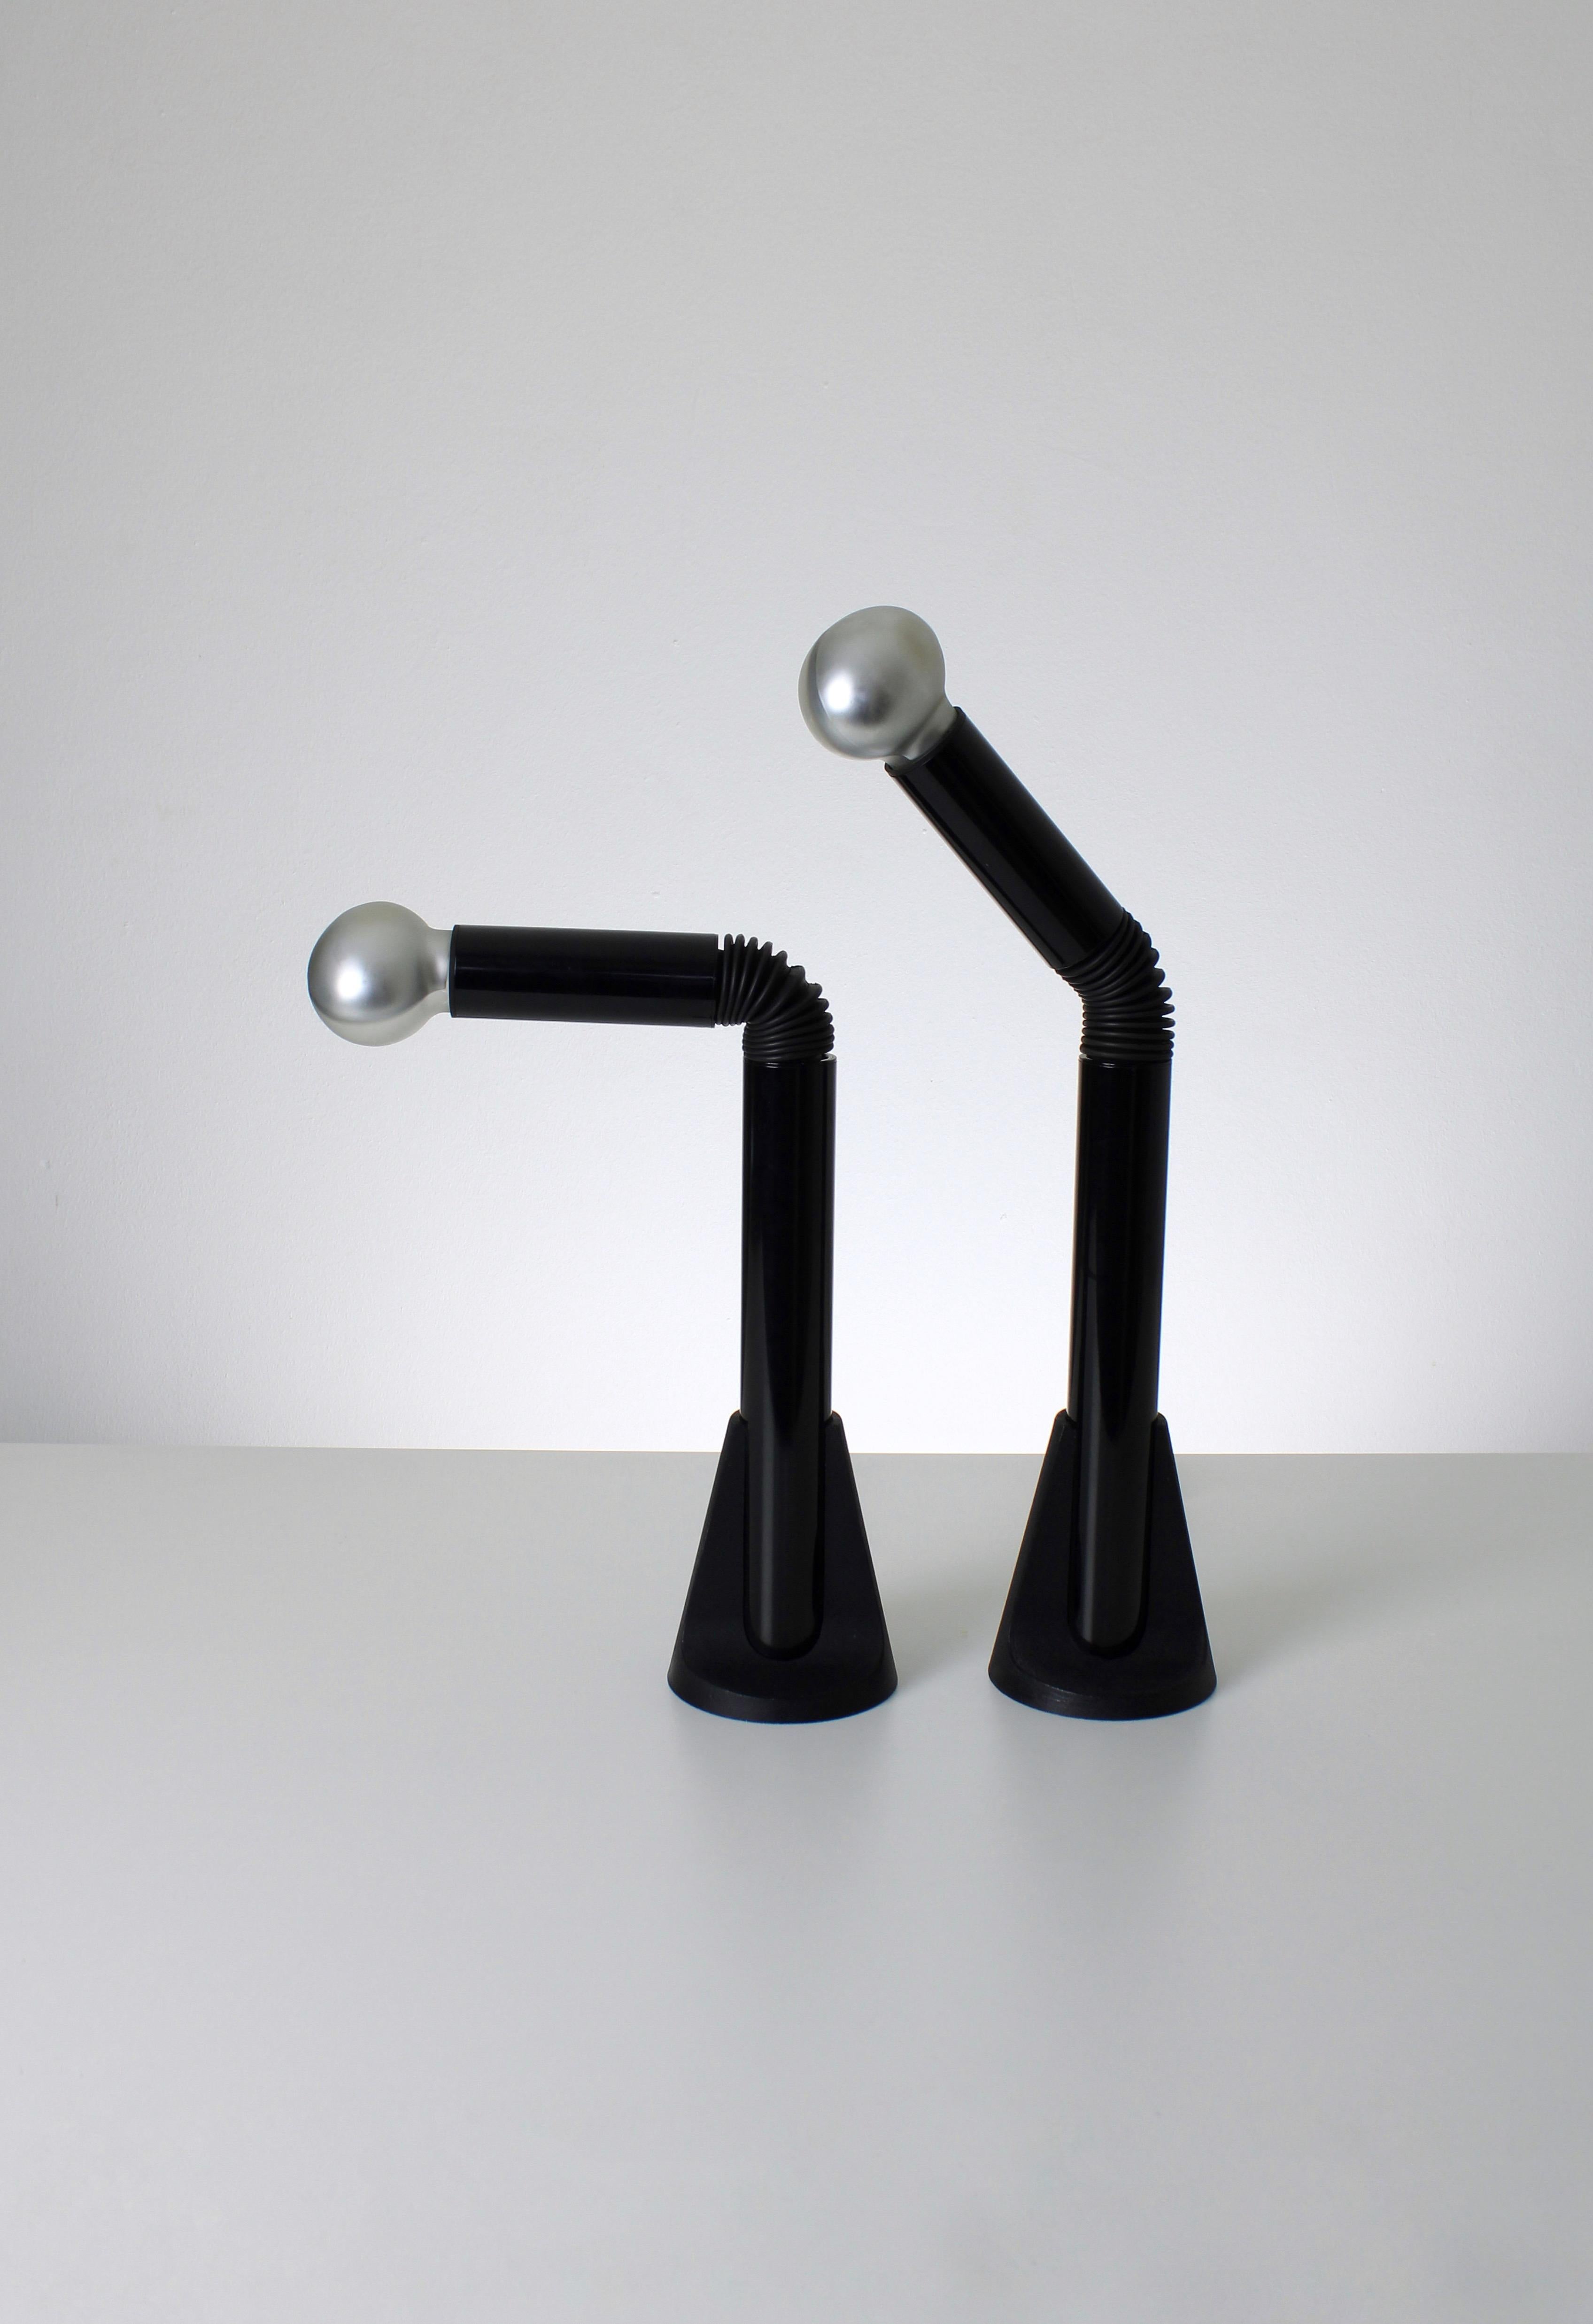 Pair of identical Periscopio desk lamps designed by Danilo & Corrado Aroldi for Stilnovo in 1967.  Part of the Periscopio series which was produced in a wide variety of colors and versions. The head of the lamp is 180° adjustable. Both lamps are in